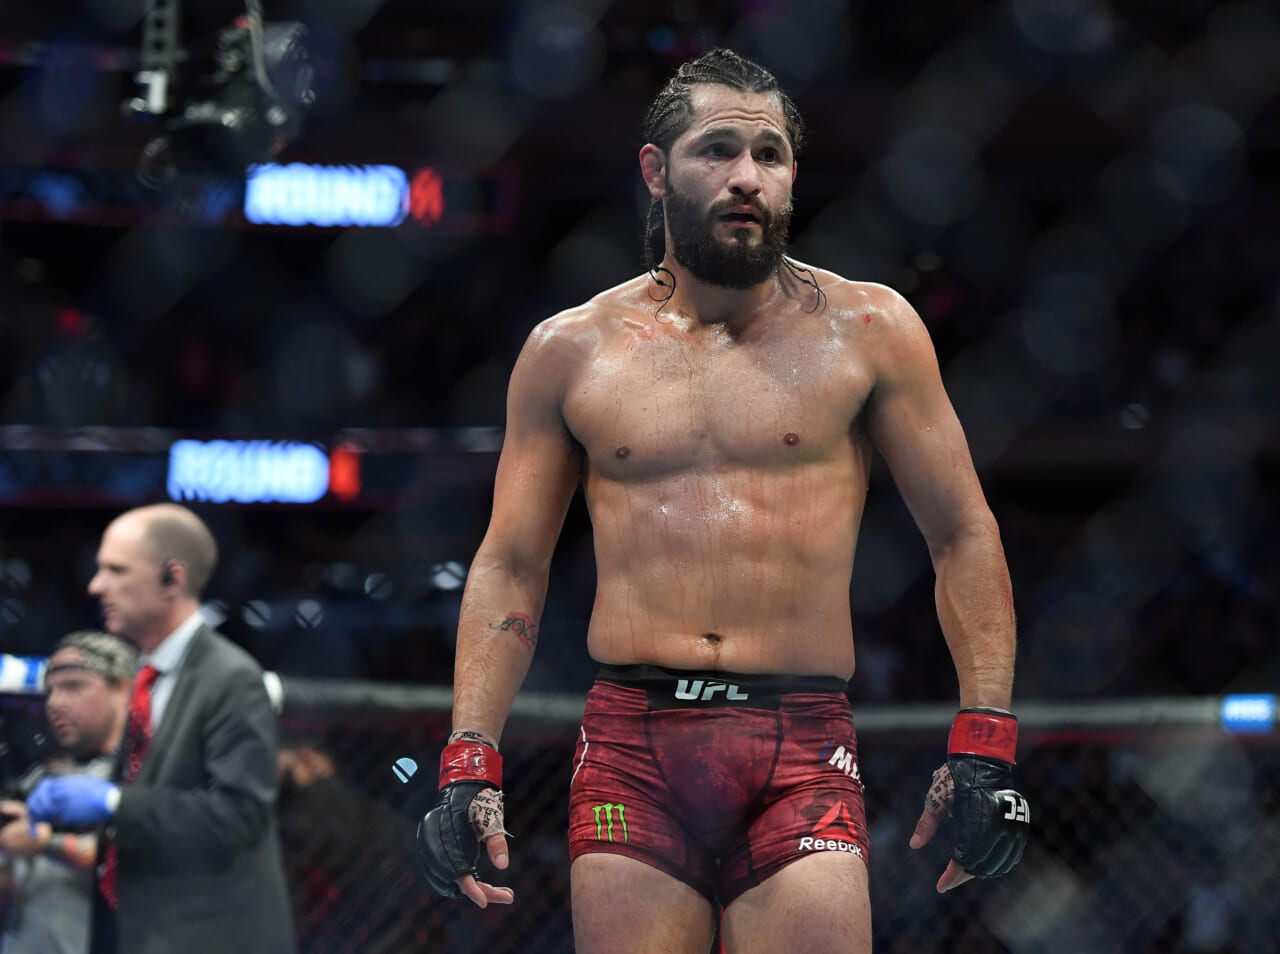 BREAKING: Jorge Masvidal out of UFC 269 bout against Leon Edwards